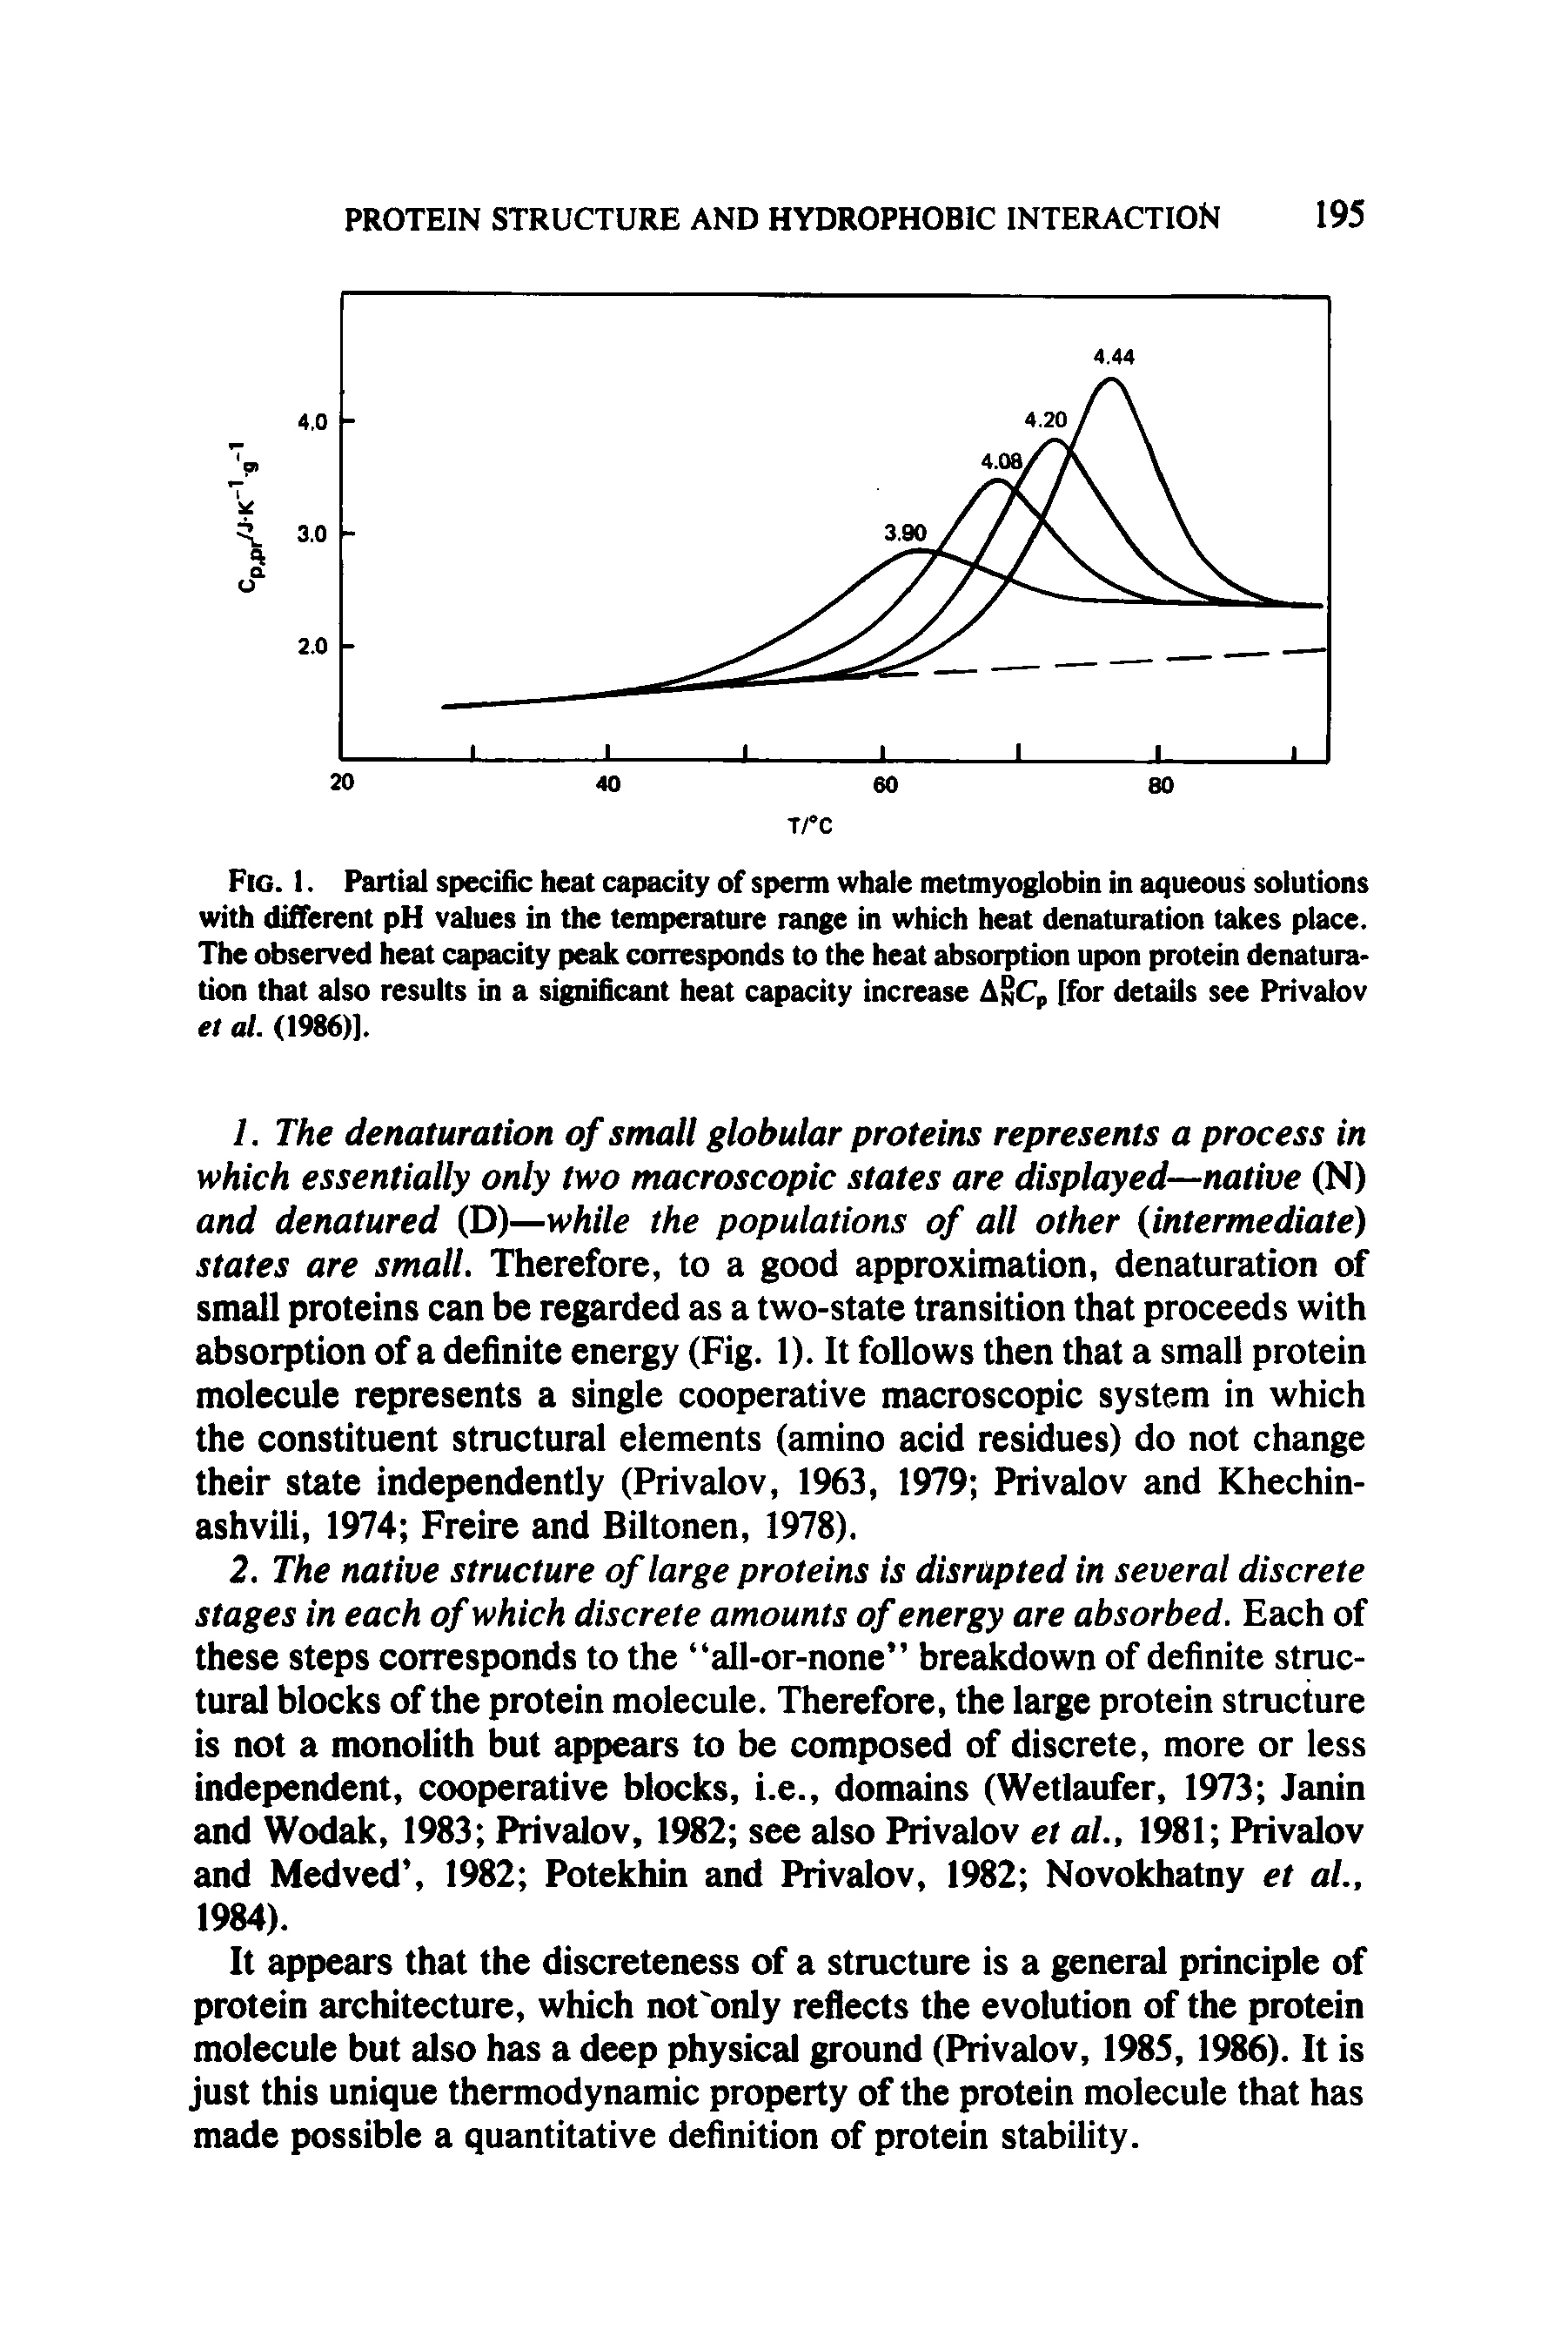 Fig. 1. Partial specific heat capacity of sperm whale metmyoglobin in aqueous solutions with different pH values in the temperature range in which heat denaturation takes place. The observed heat capacity peak corresponds to the heat absorption upon protein denaturation that also results in a significant heat capacity increase A°CP [for details see Privalov et al. (1986)].